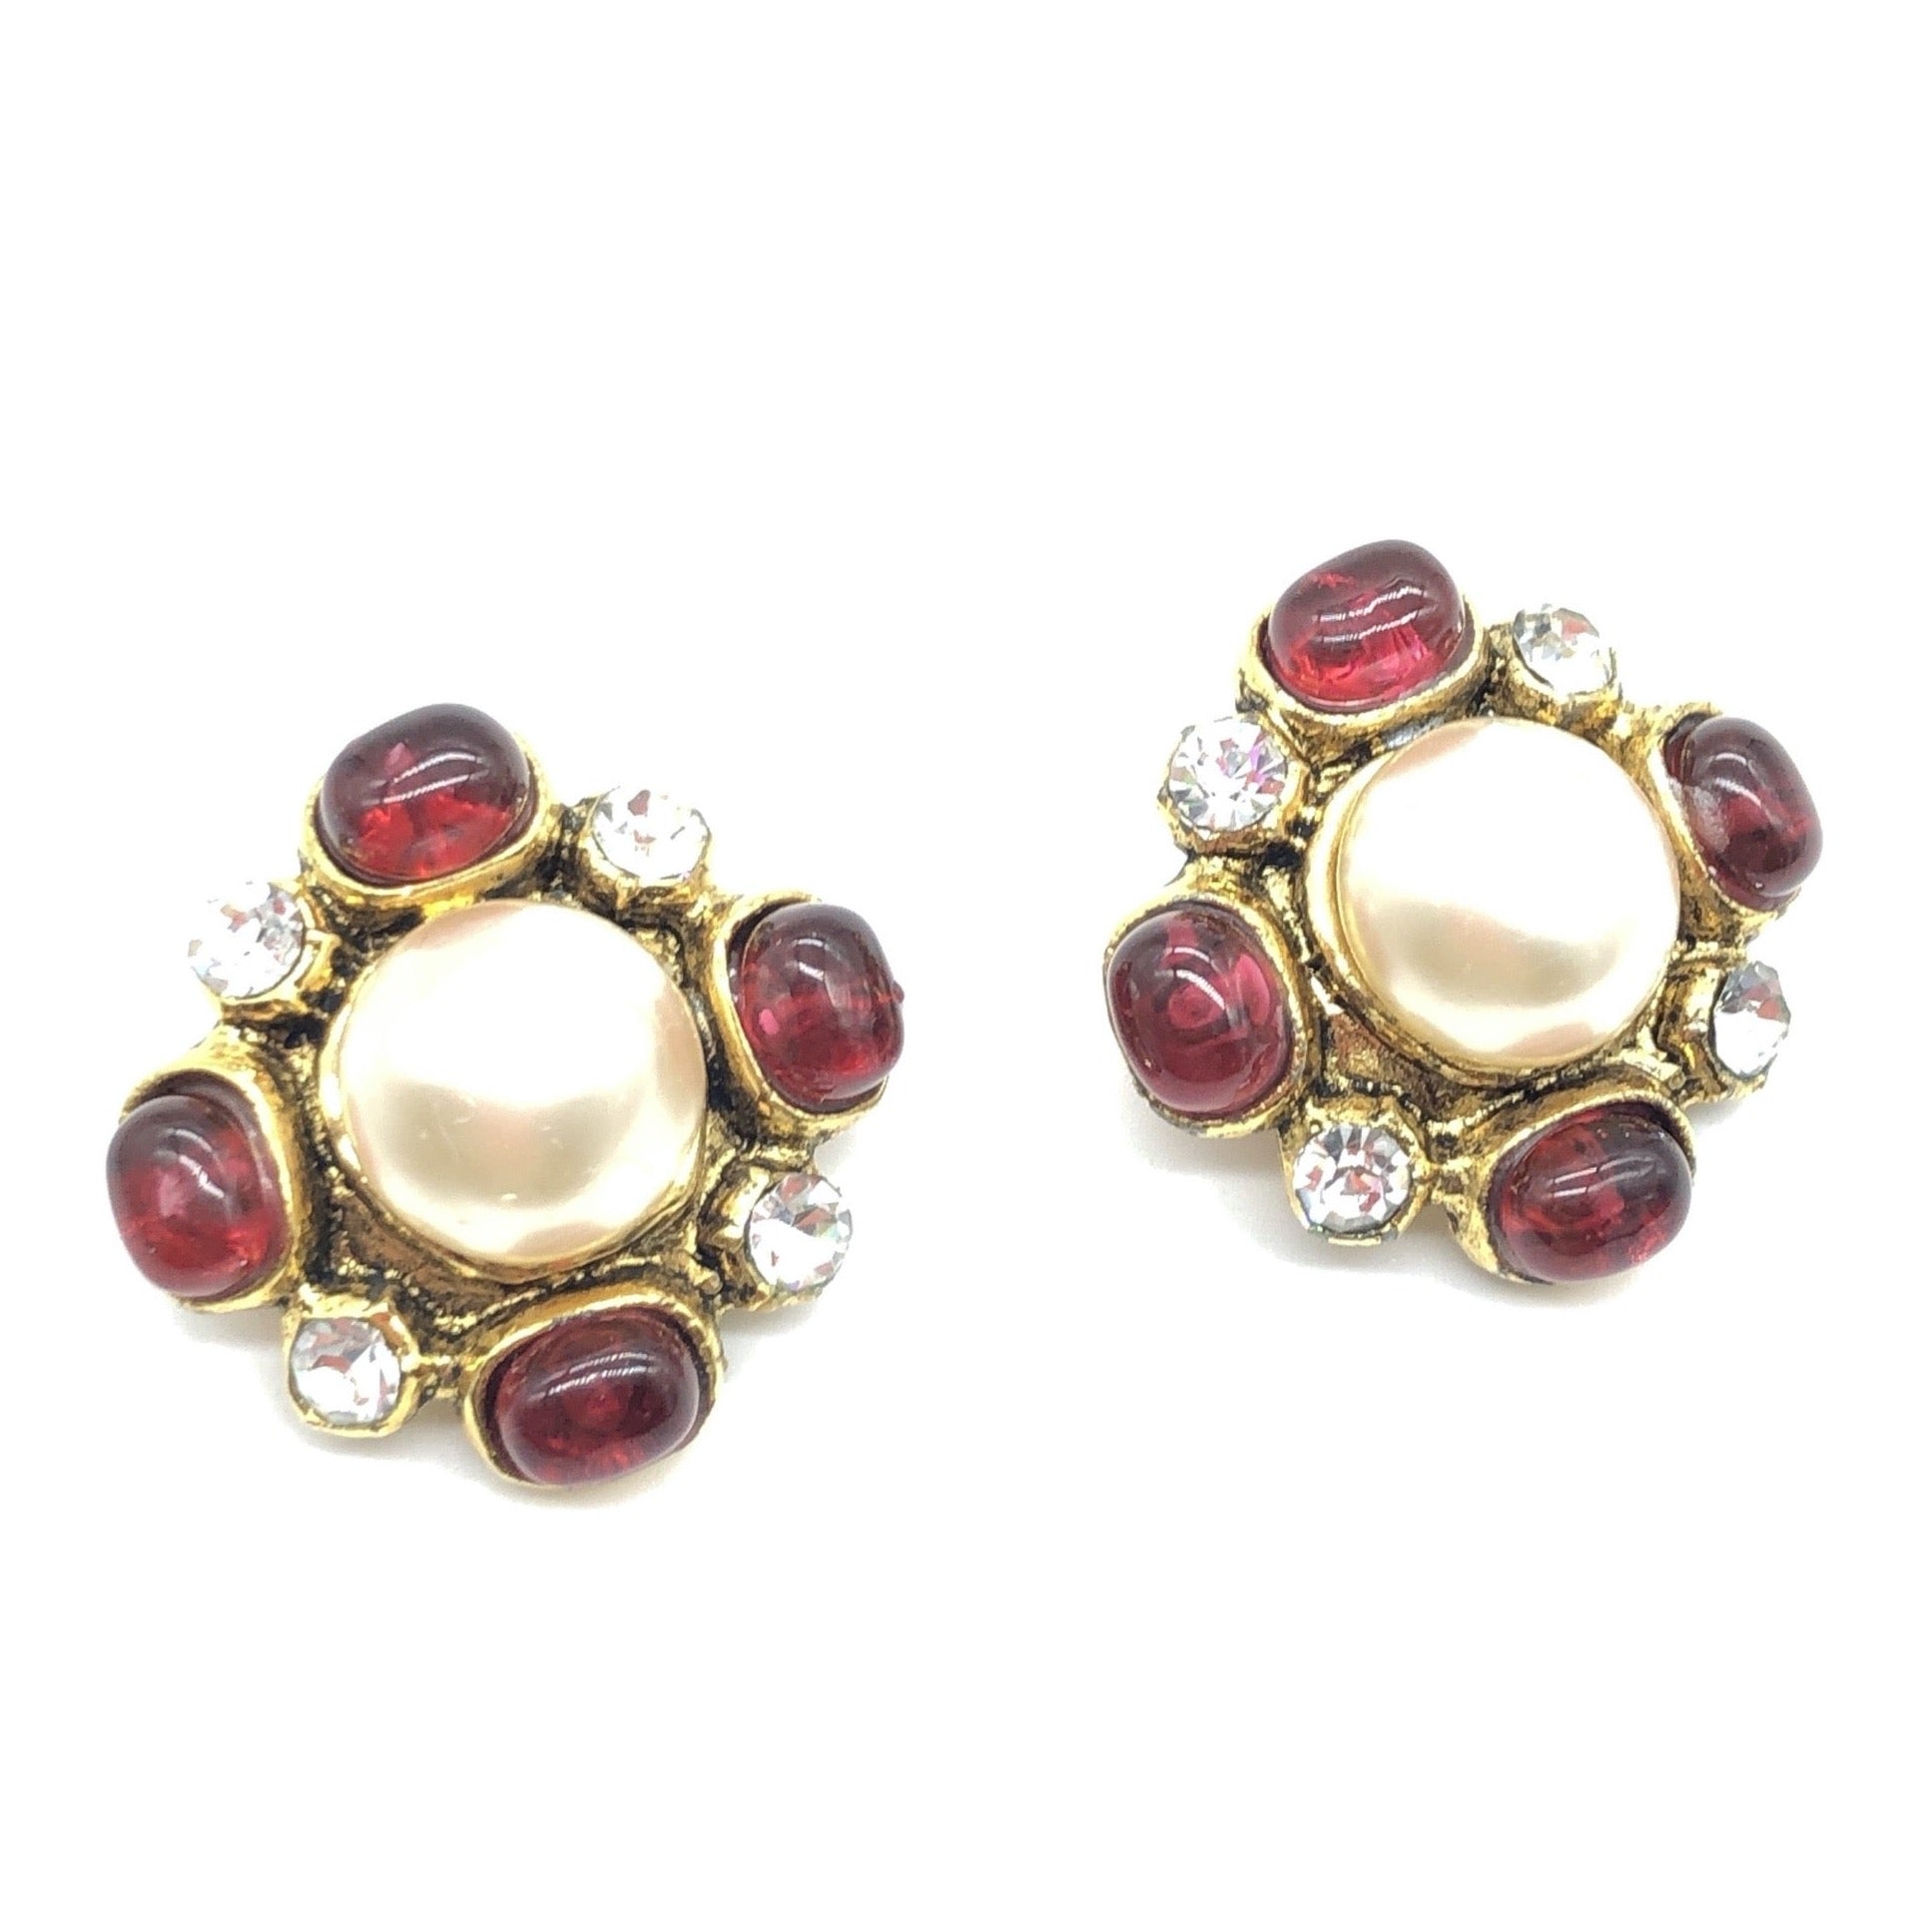 Chanel 1970's Pearl and Gripoix Earrings – Very Vintage